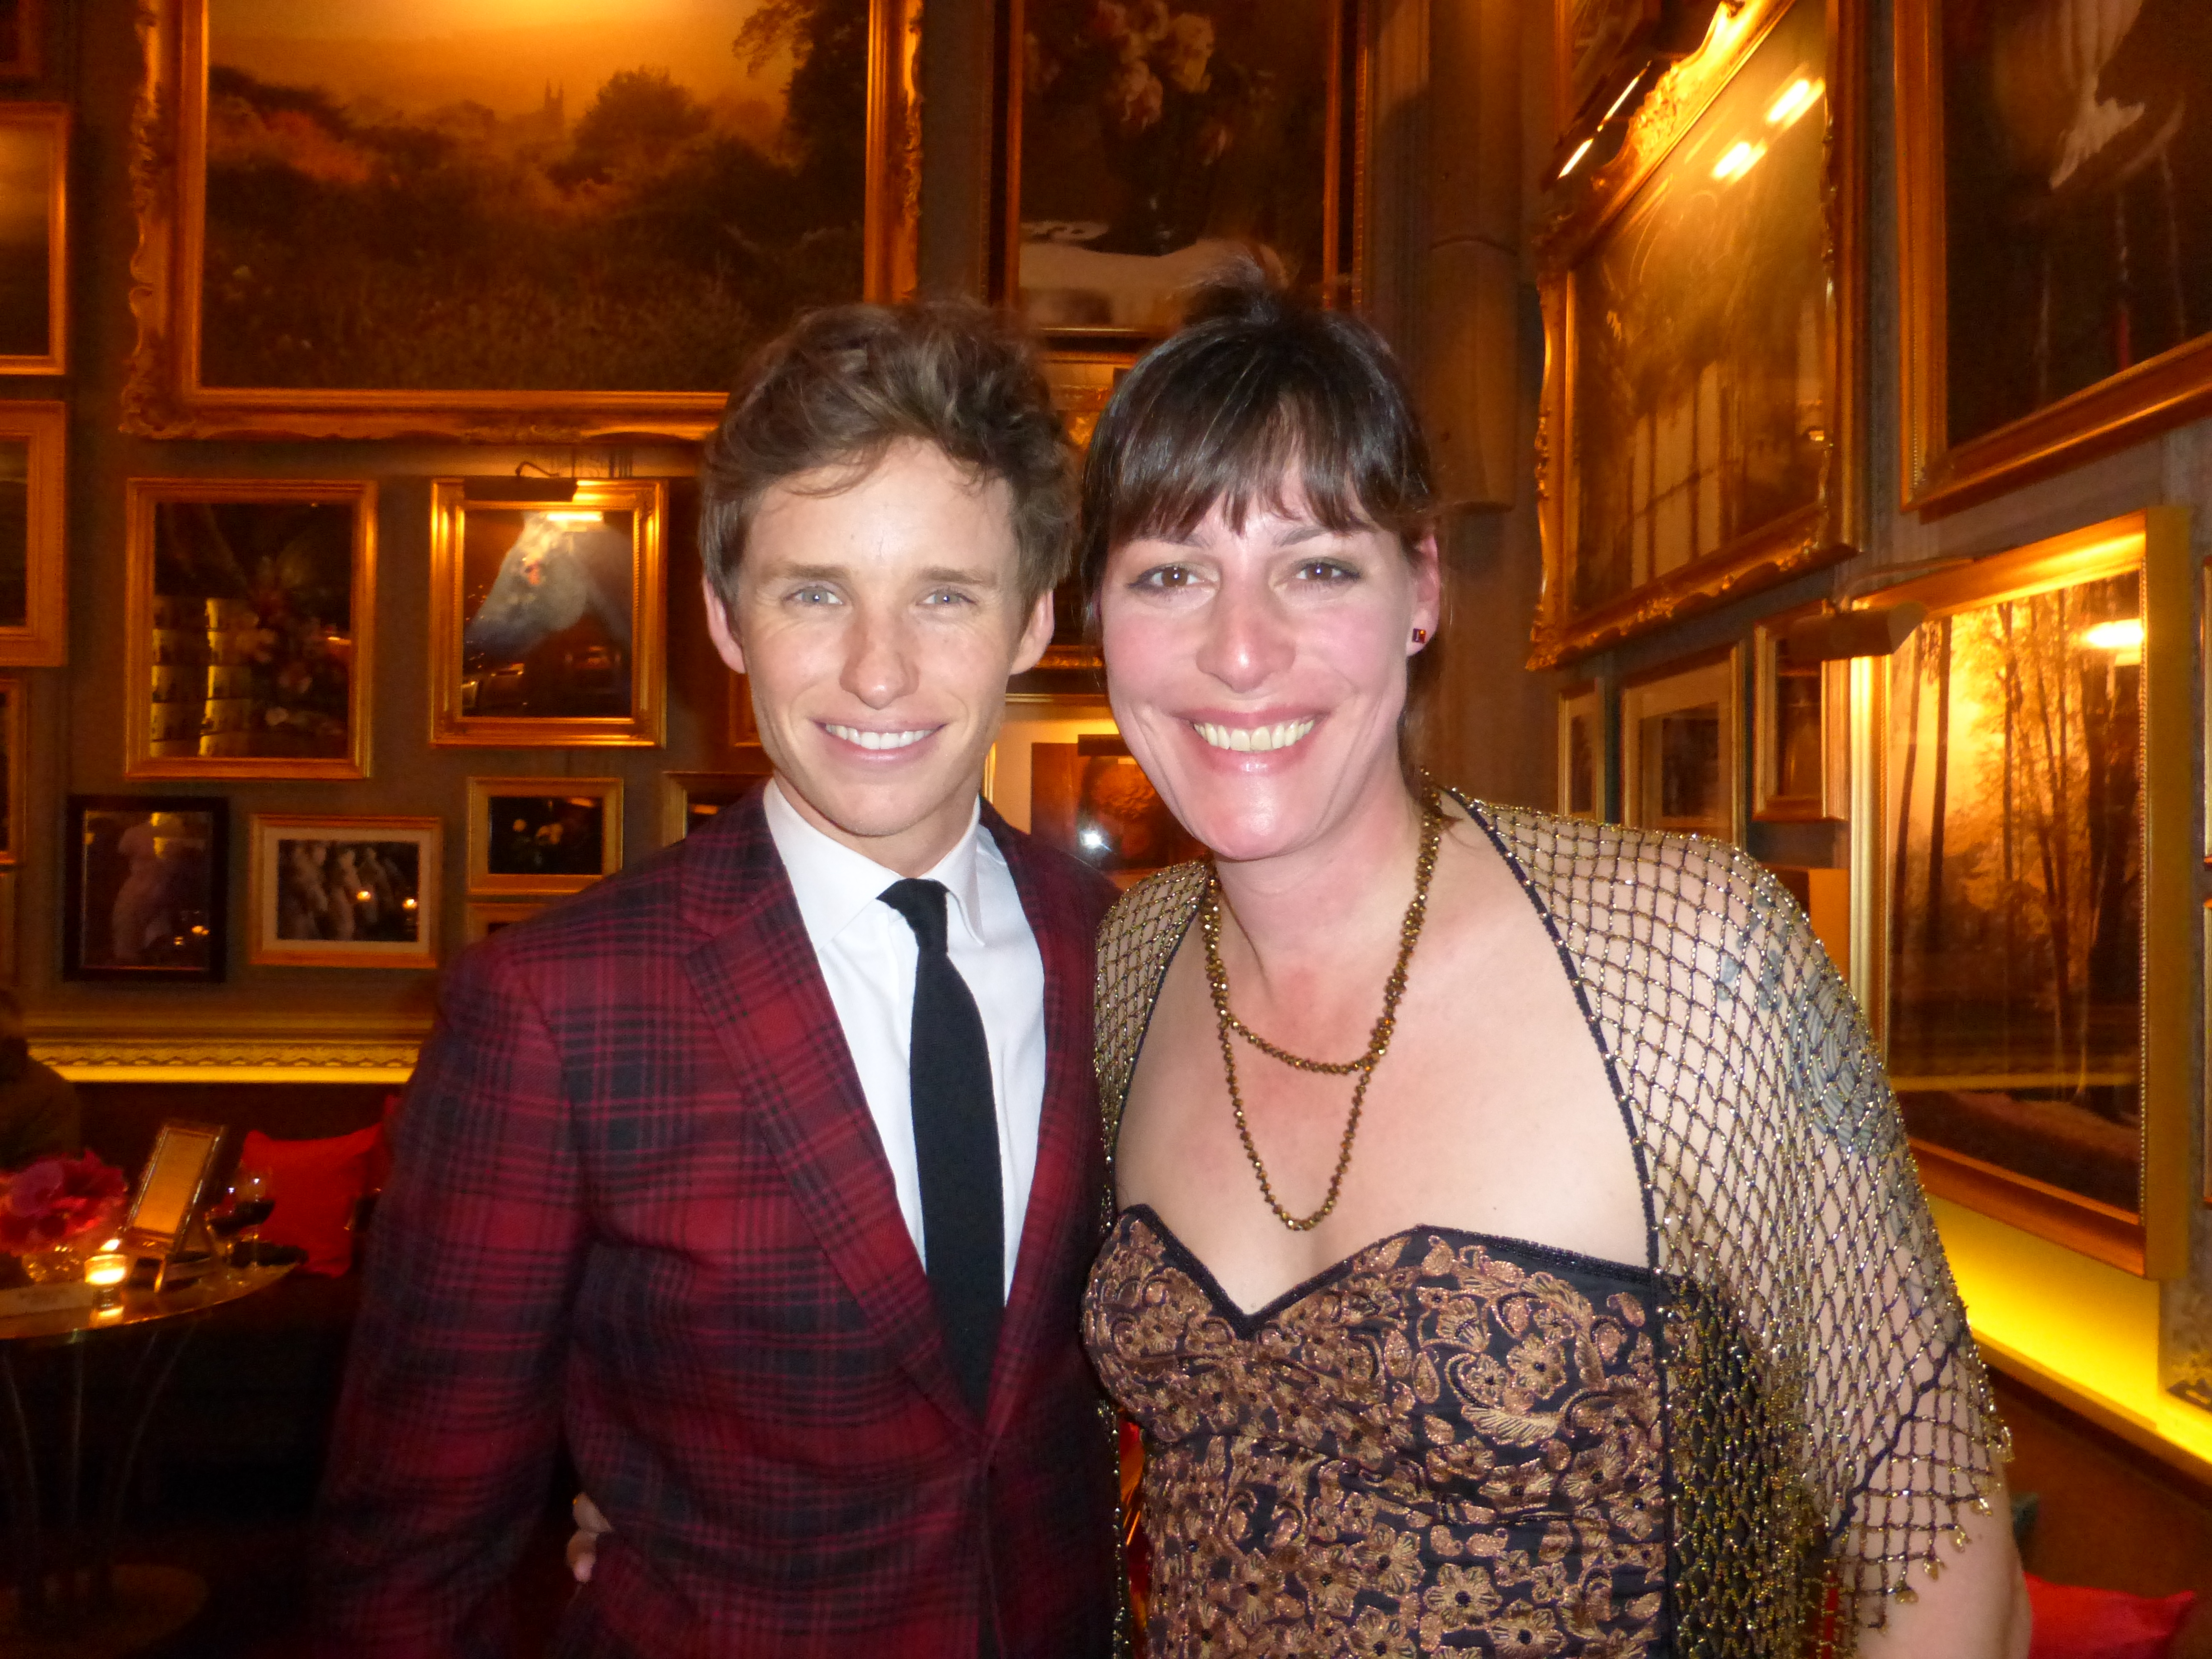 With Eddie Redmayne at THE DANISH GIRL post-premiere reception, London, 08.12.15